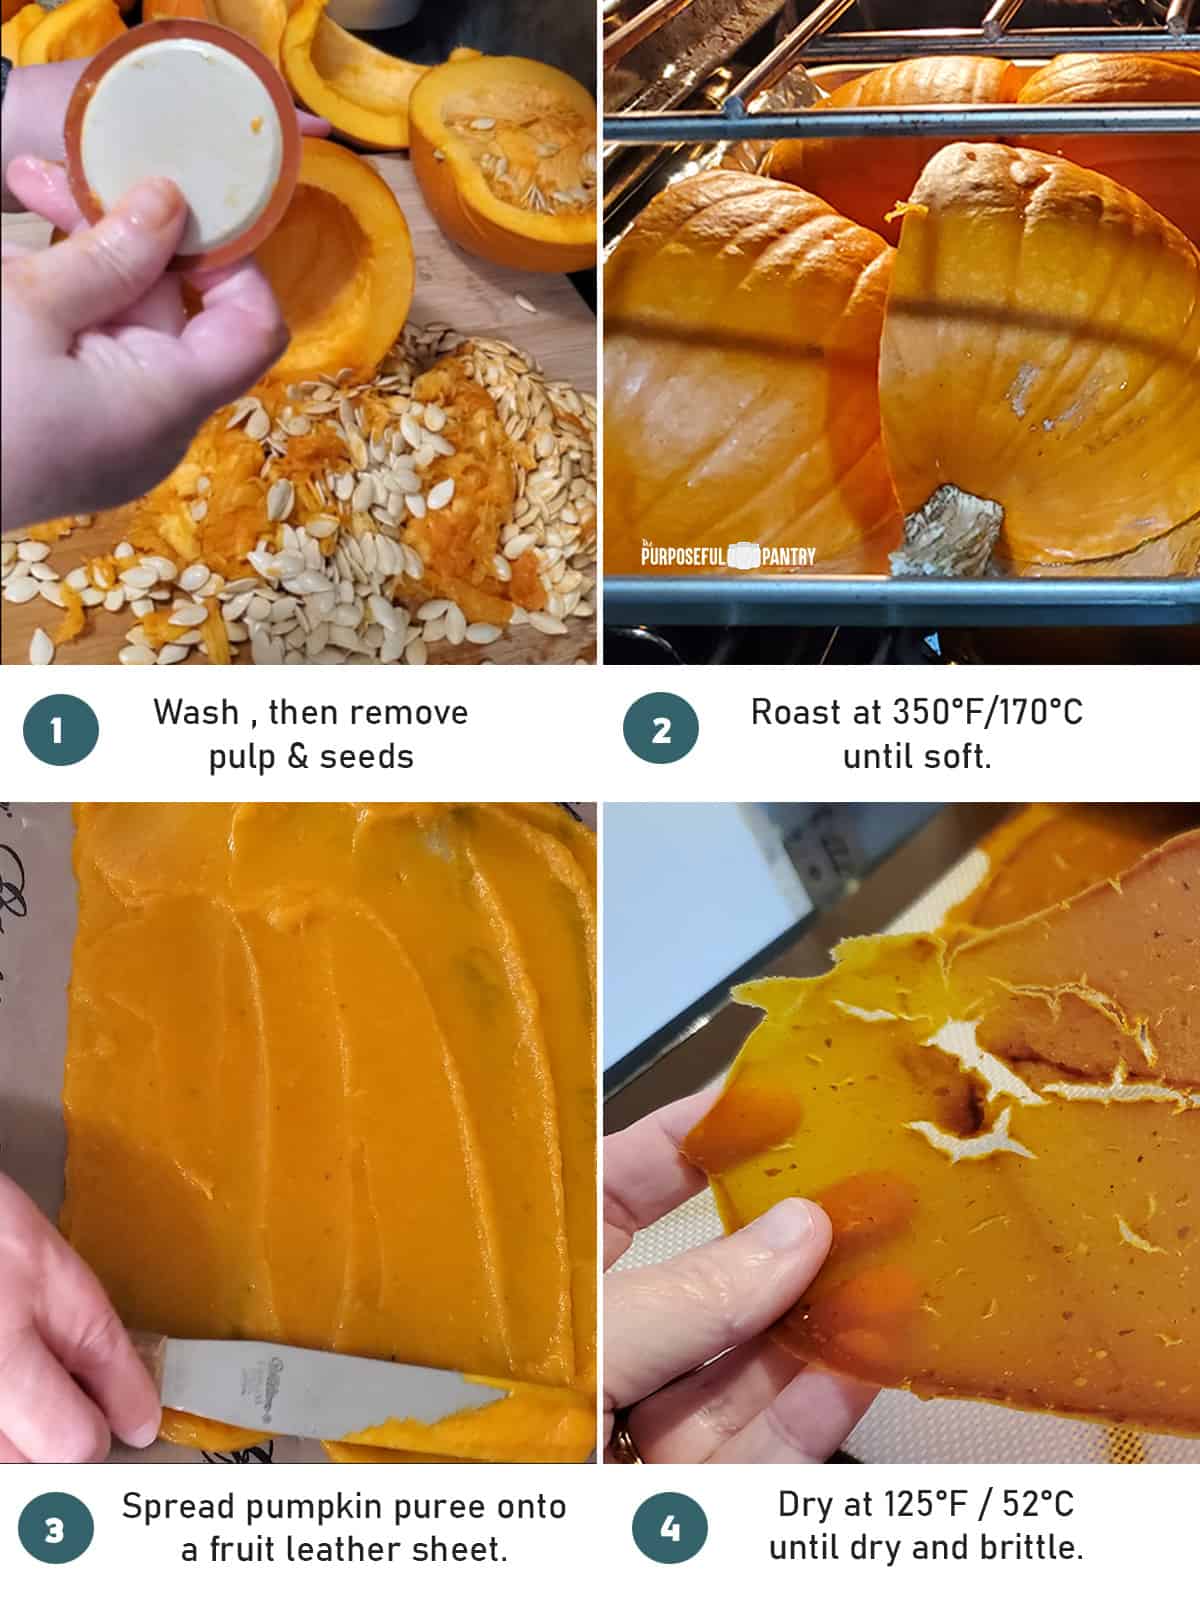 Step by Step instructions on dehydrating a pumpkin